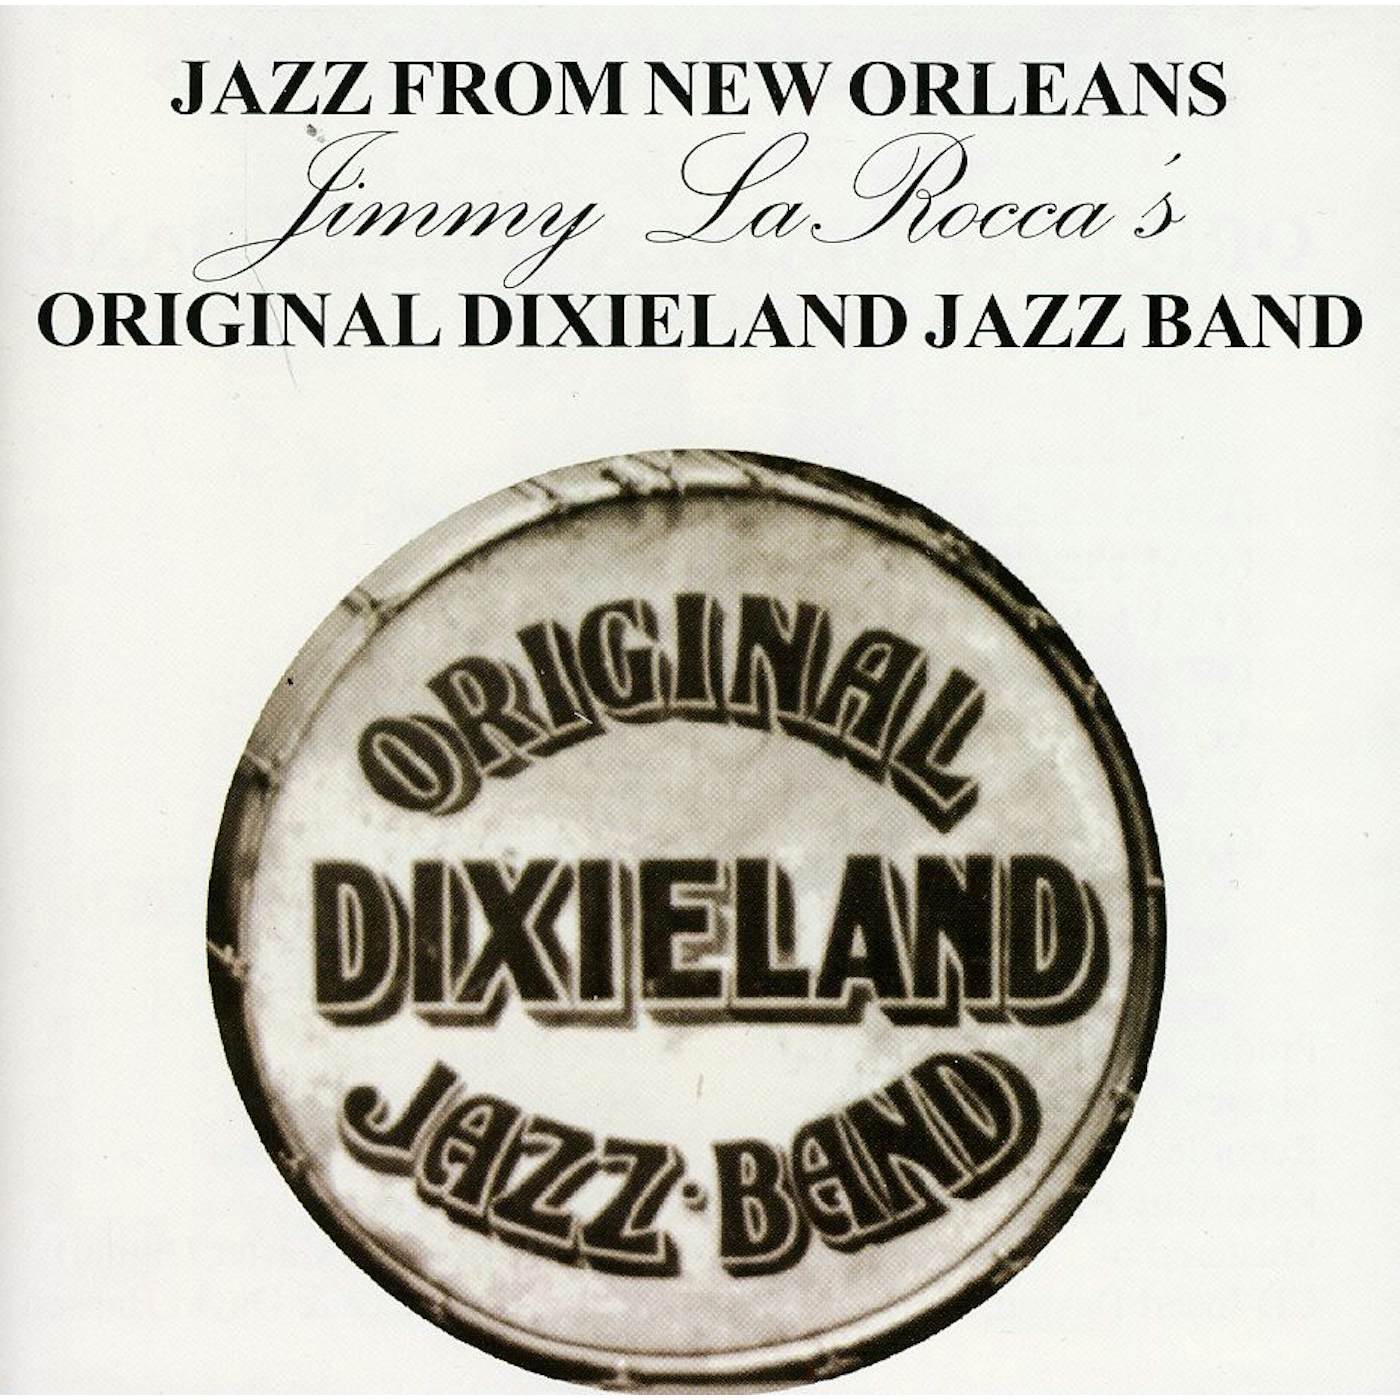 Original Dixieland Jazz Band JAZZ FROM NEW ORLEANS CD